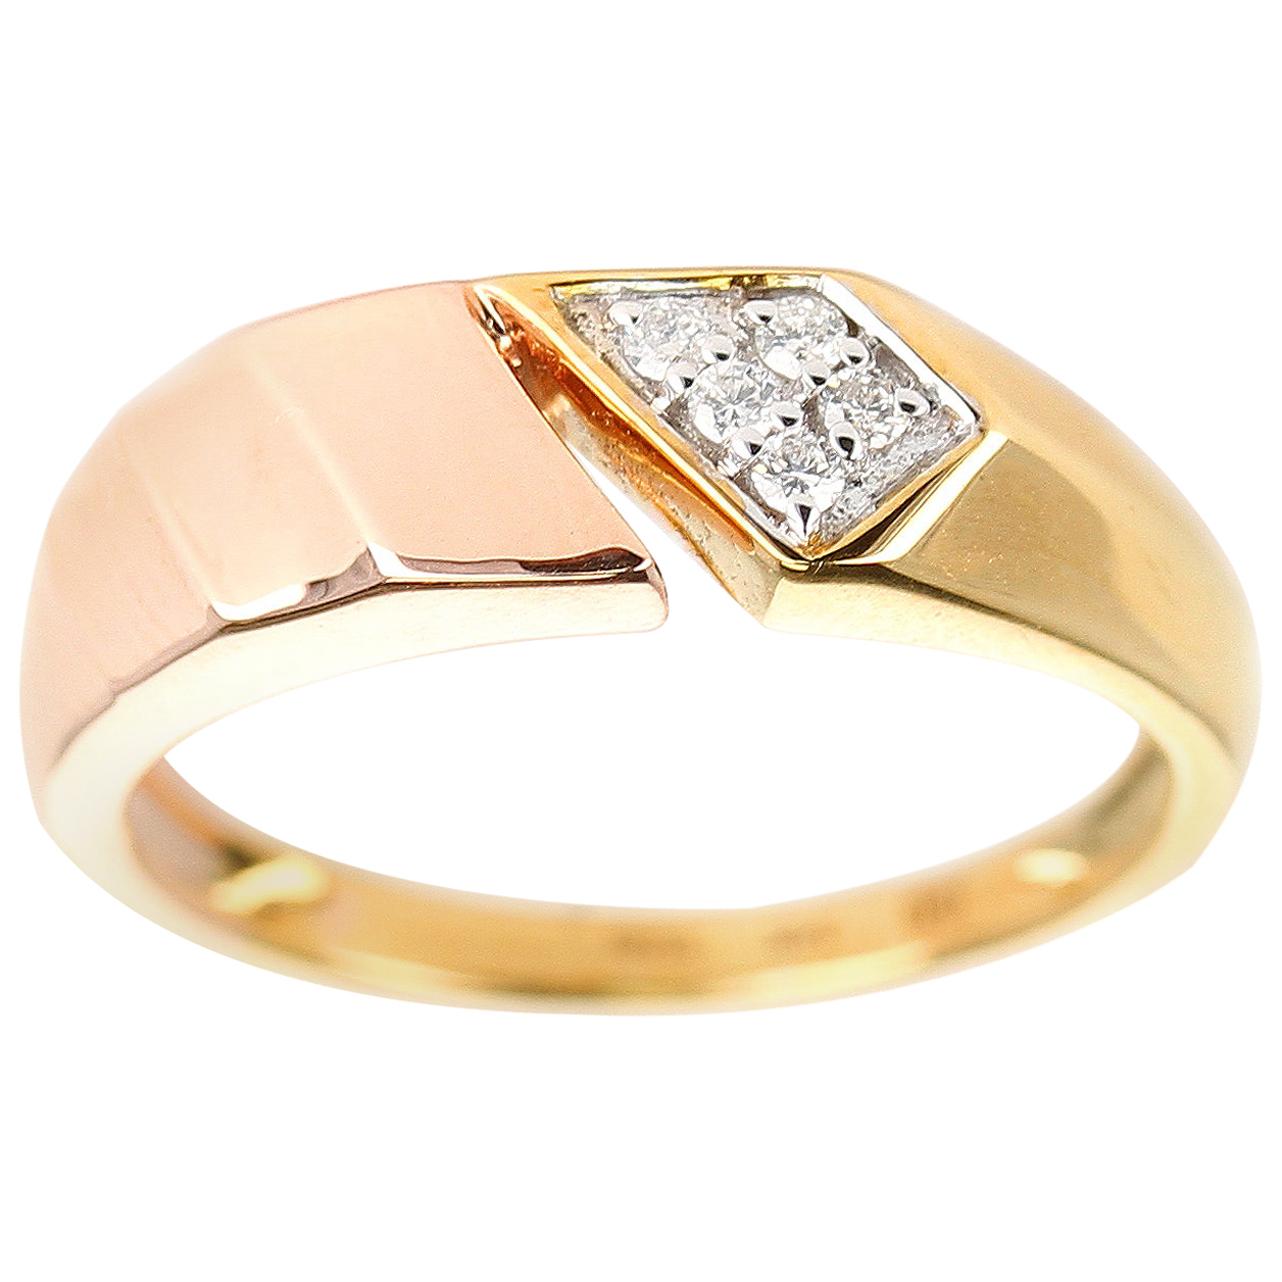 Chic Open Two-Tone Yellow and Rose Gold 14 Karat Diamond Ring